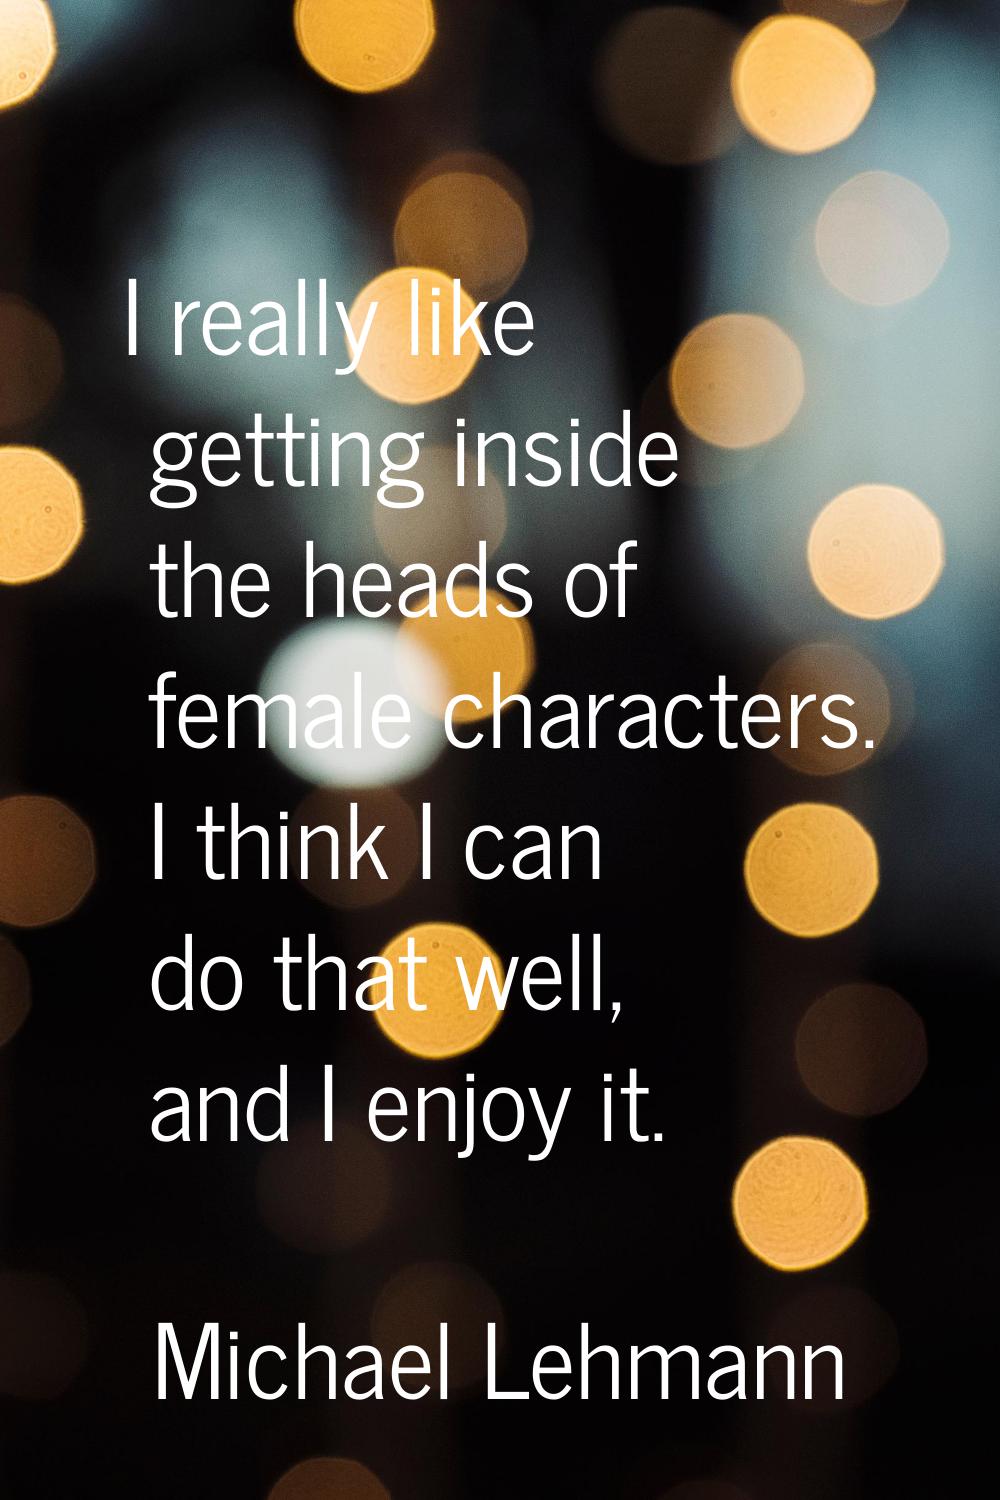 I really like getting inside the heads of female characters. I think I can do that well, and I enjo